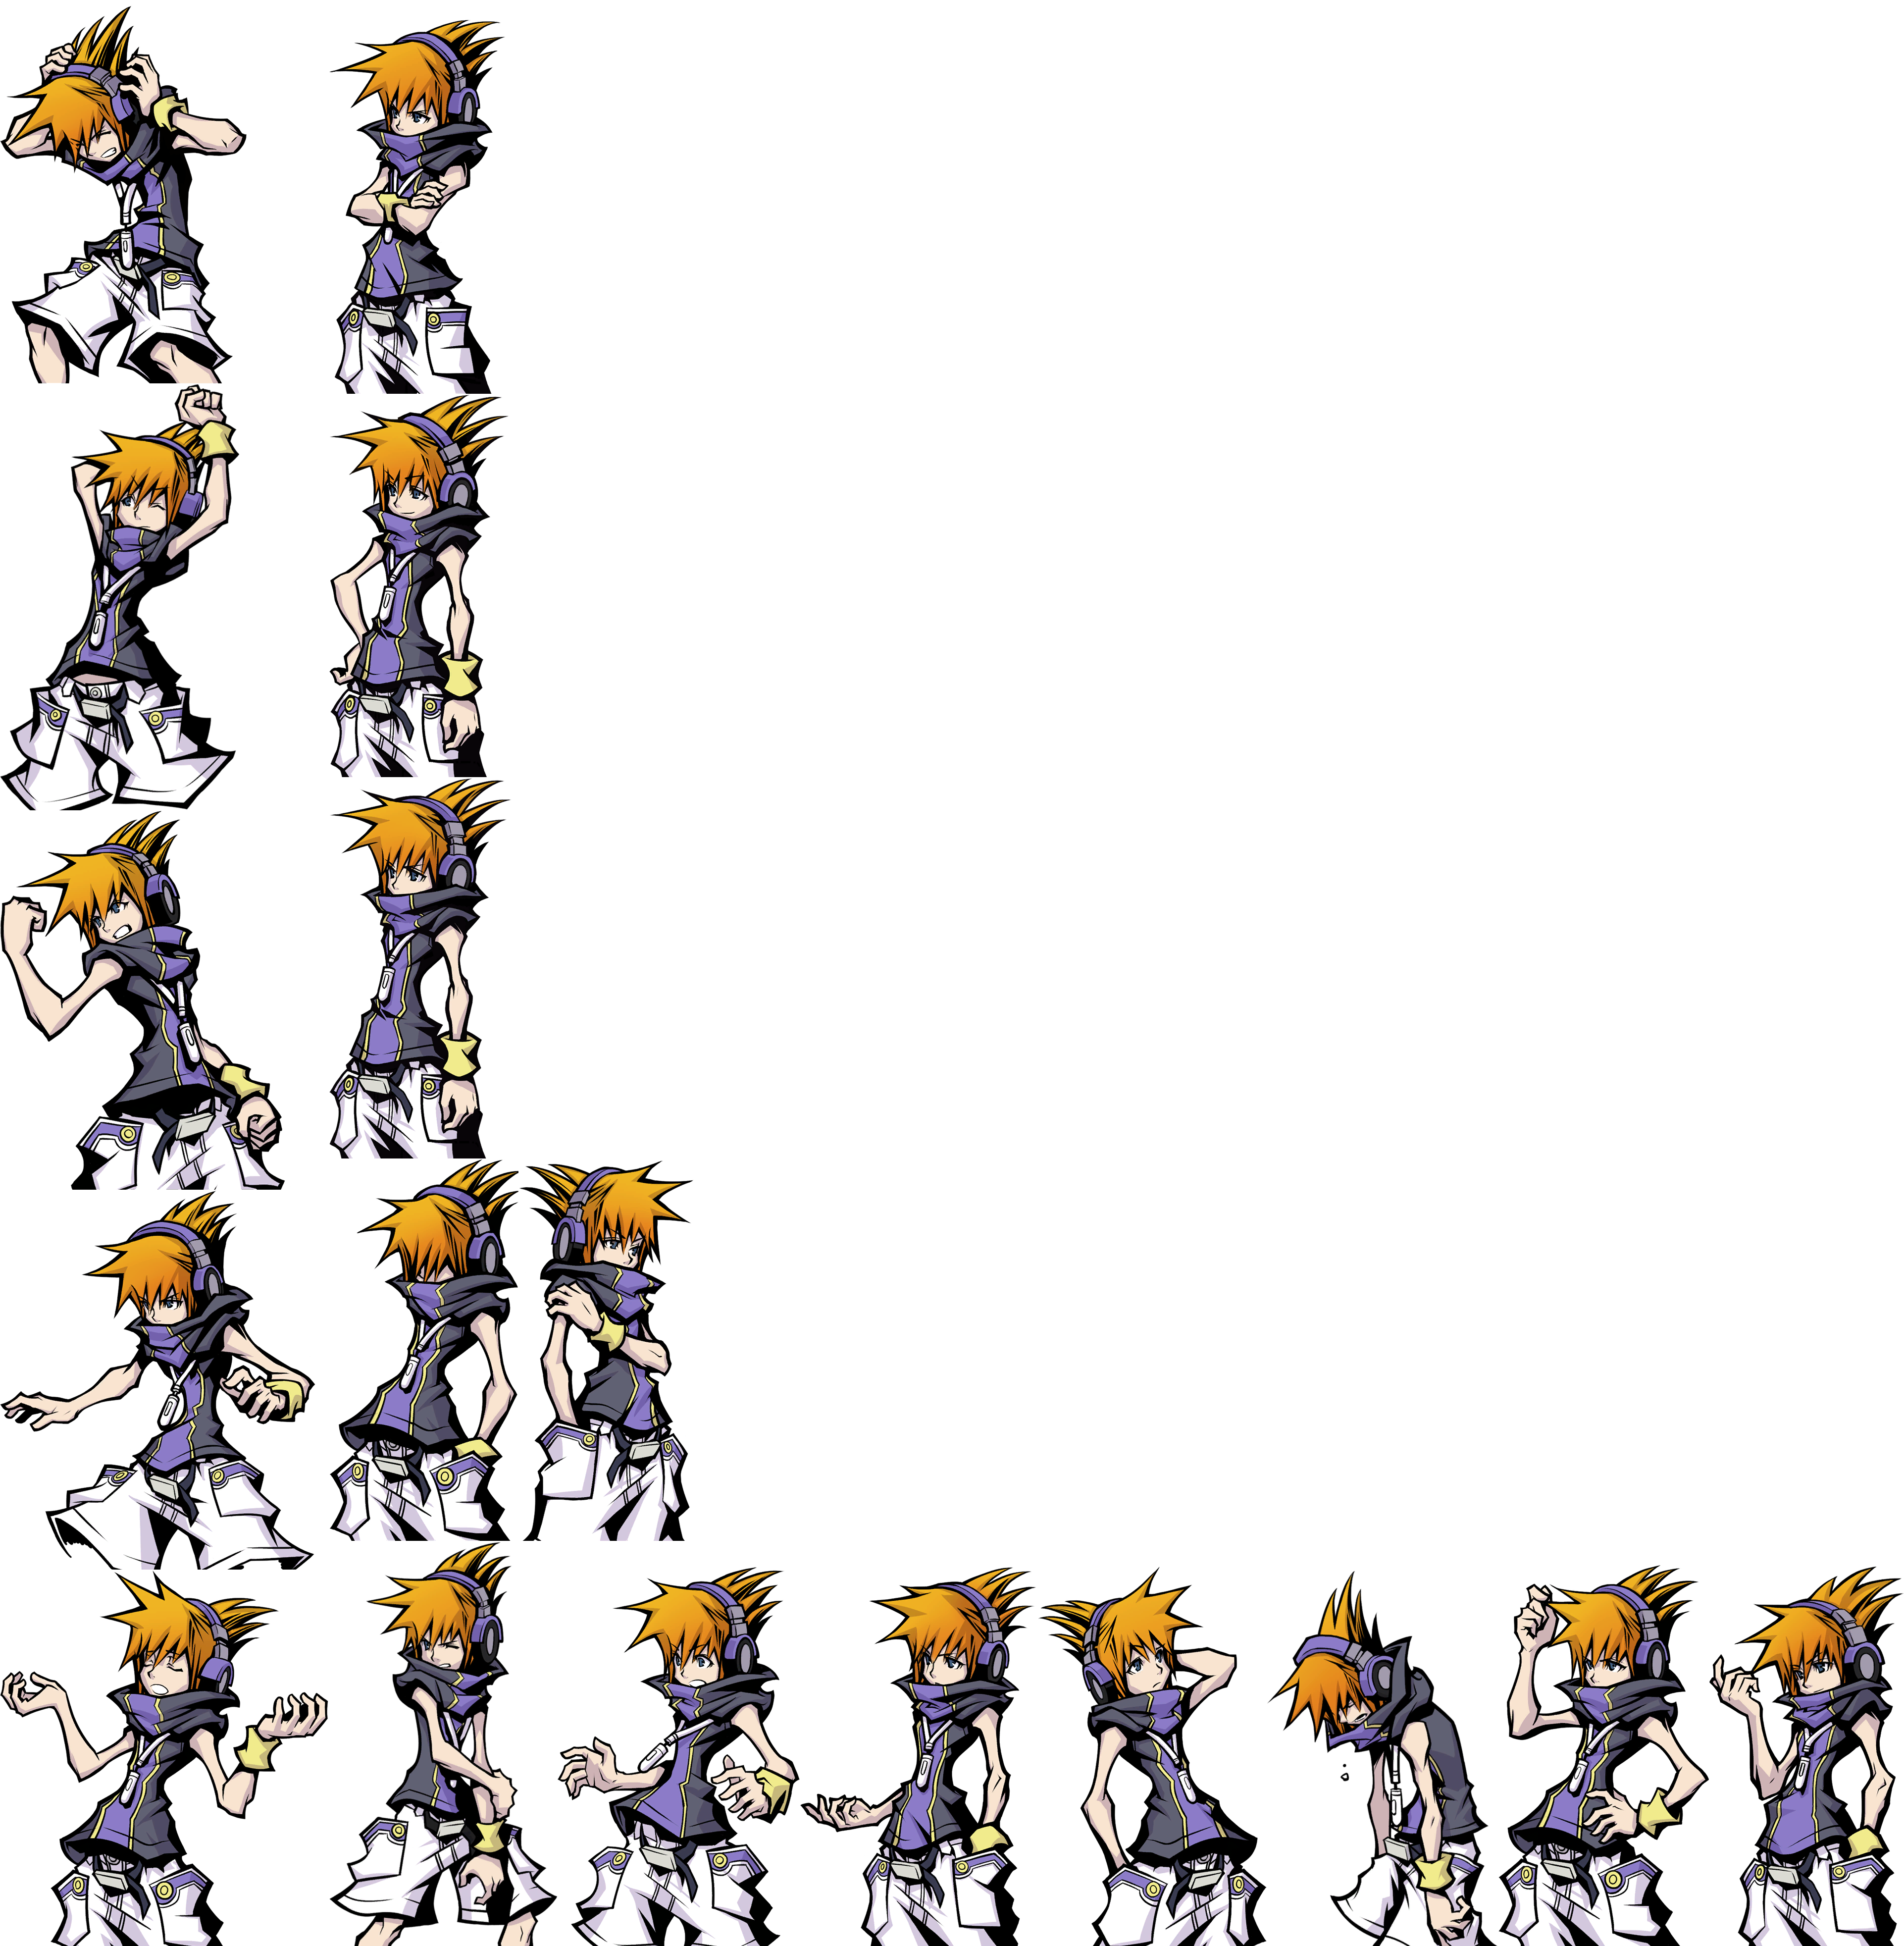 The World Ends With You: Final Remix - Neku